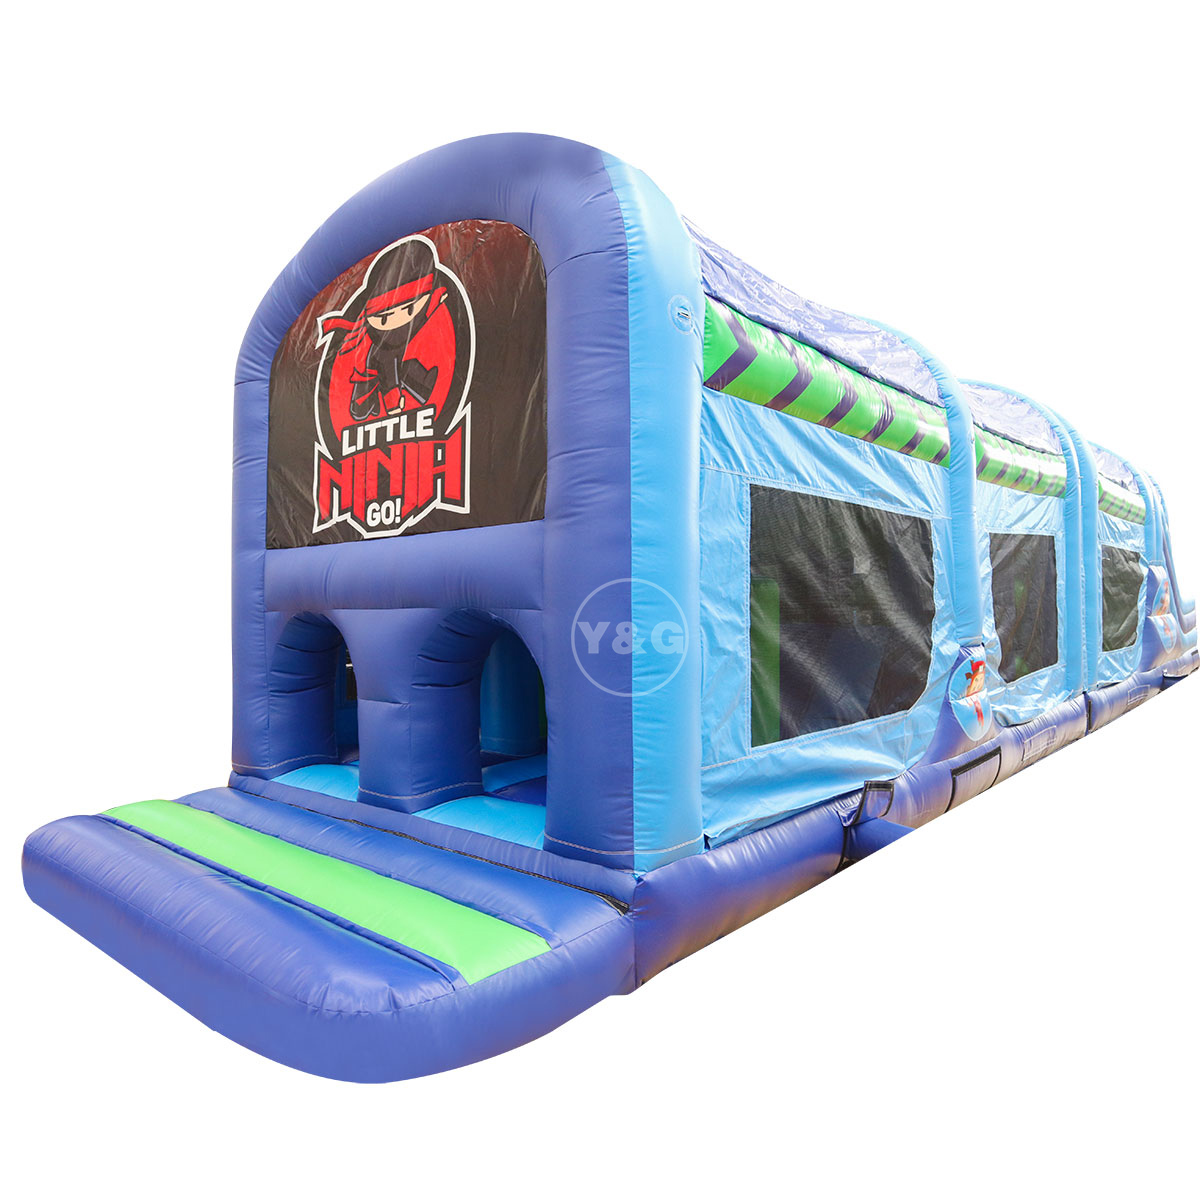 Inflatable cartoon obstacle courseYGO63